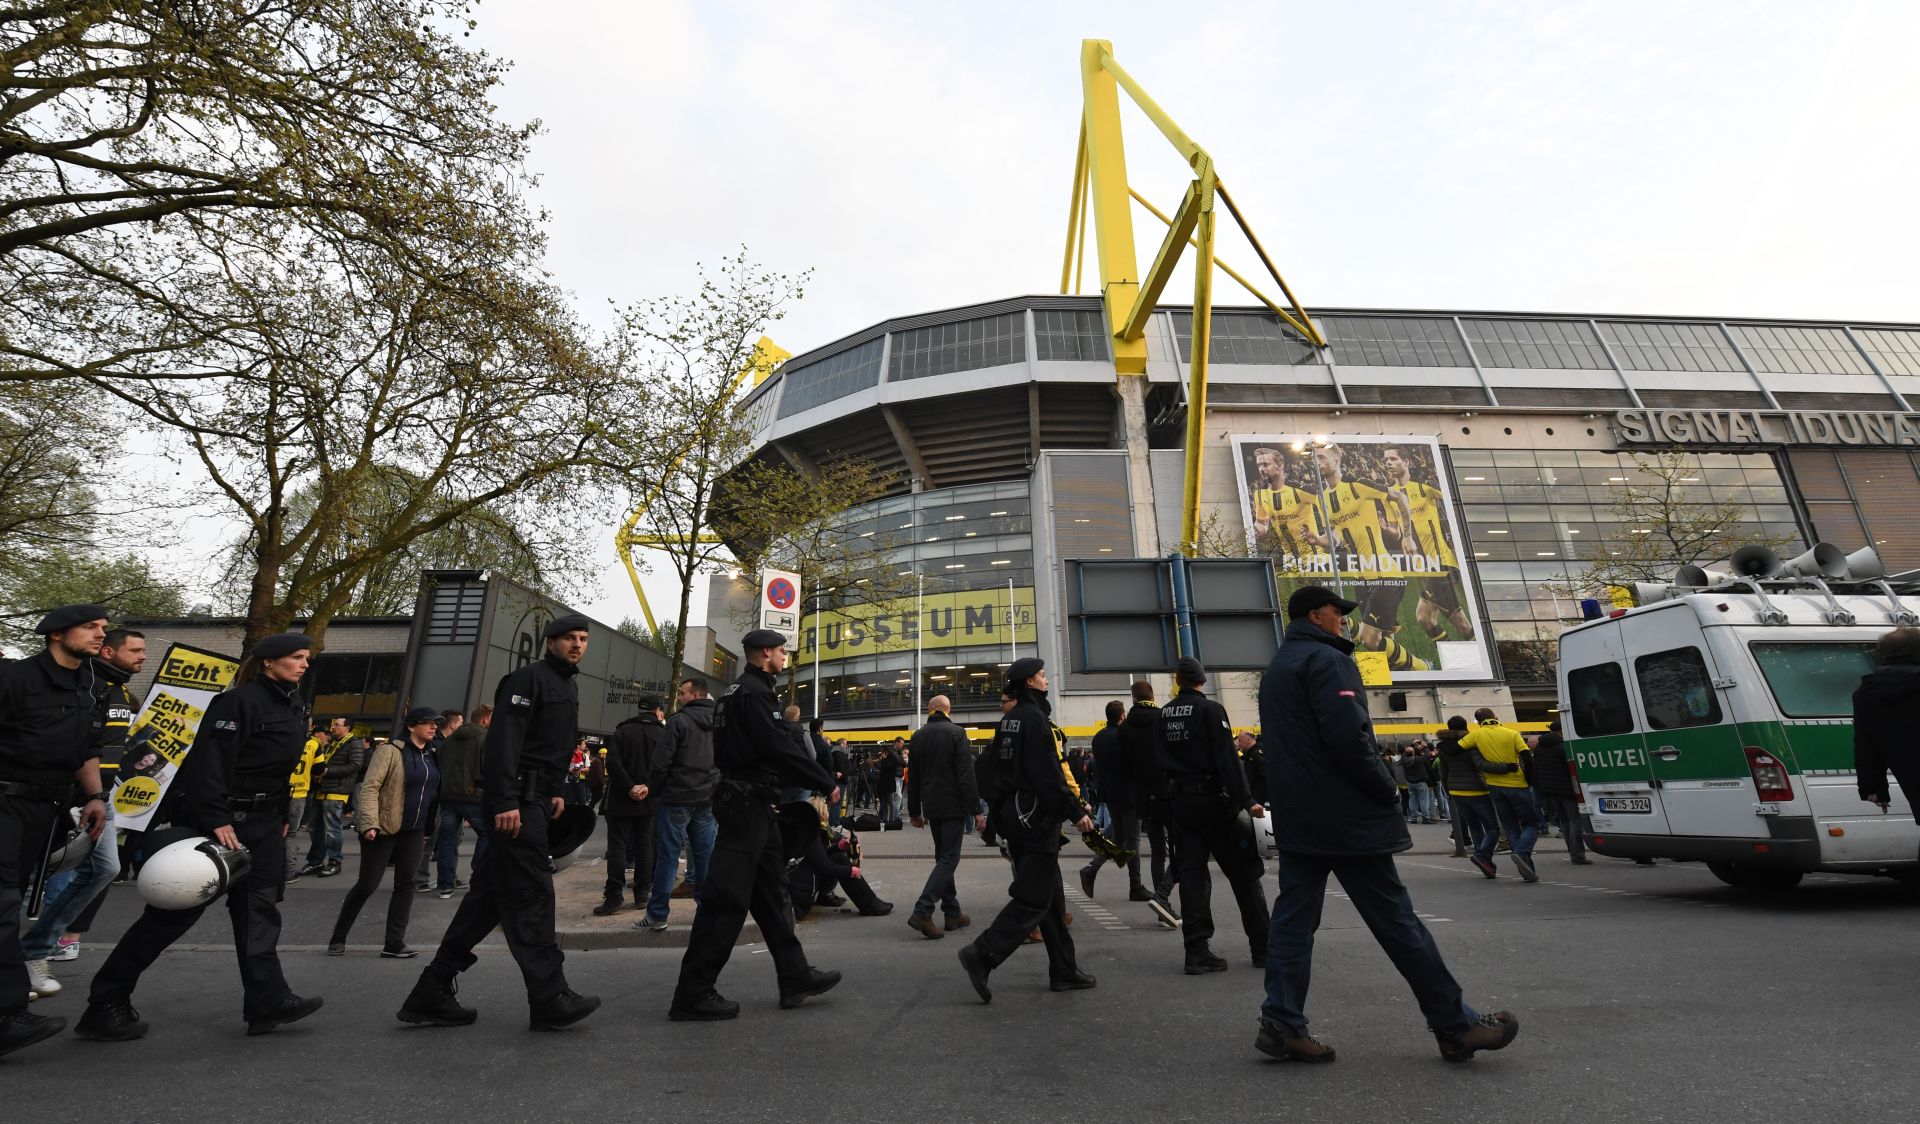 Police officers and fans in front of the Signal Iduna Park in Dortmund, Germany, 11 April 2017. The first leg of the Champions League quarter final soccer match between Borussia Dortmund and AS Monaco had been due to be held in the stadium before being cancelled. Photo: Bernd Thissen/dpa